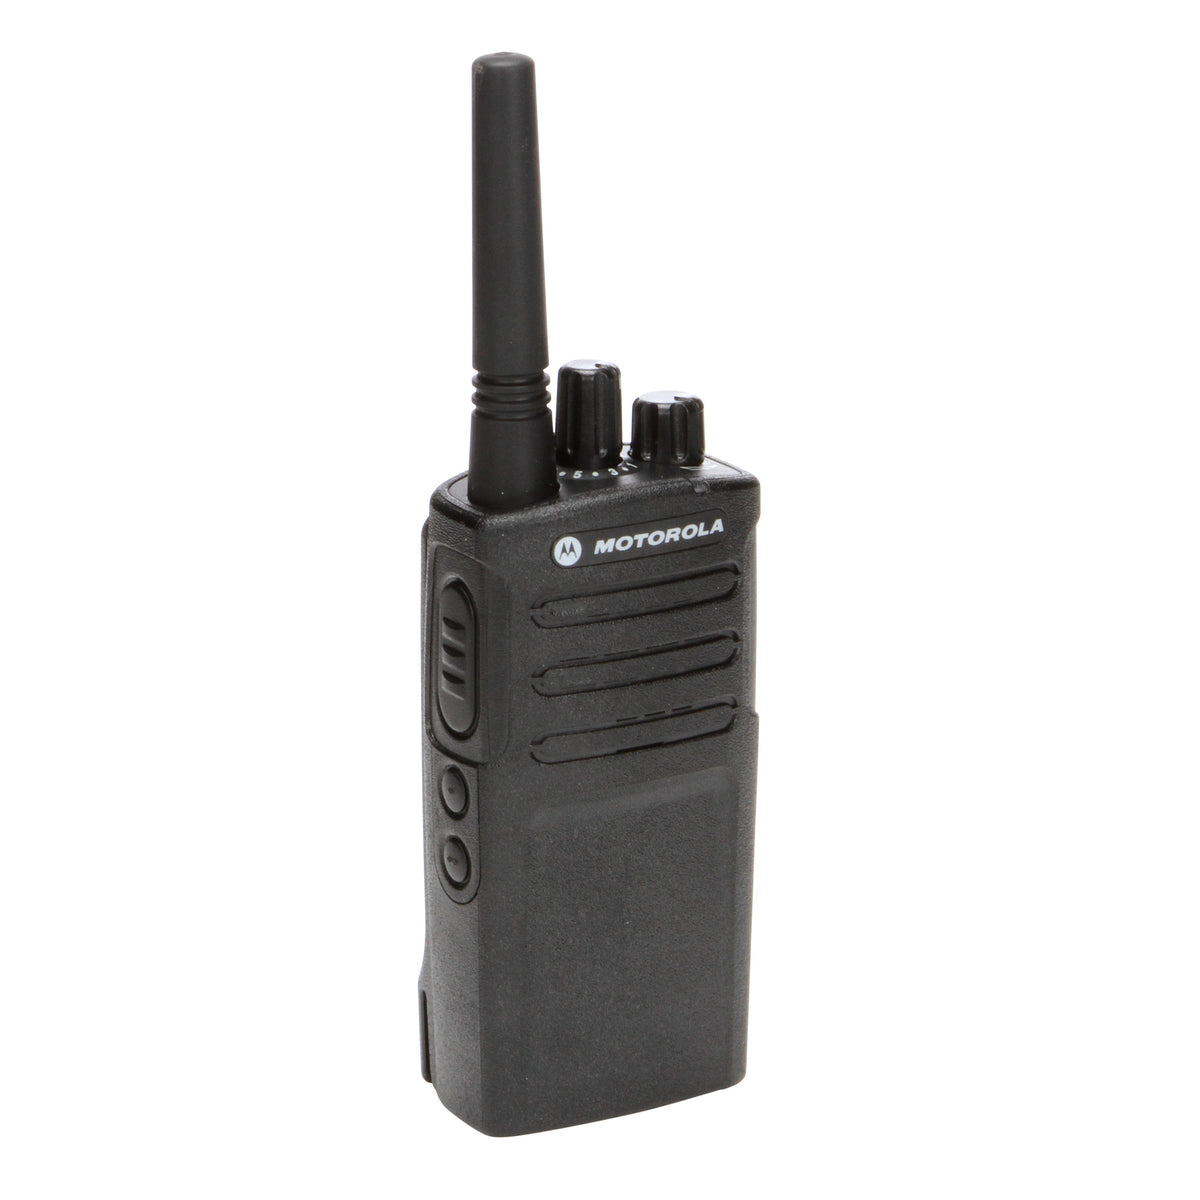 Motorola RMU2080 pack with Multi Unit Charger and Speaker Microphone|  TwoWayRadioGear